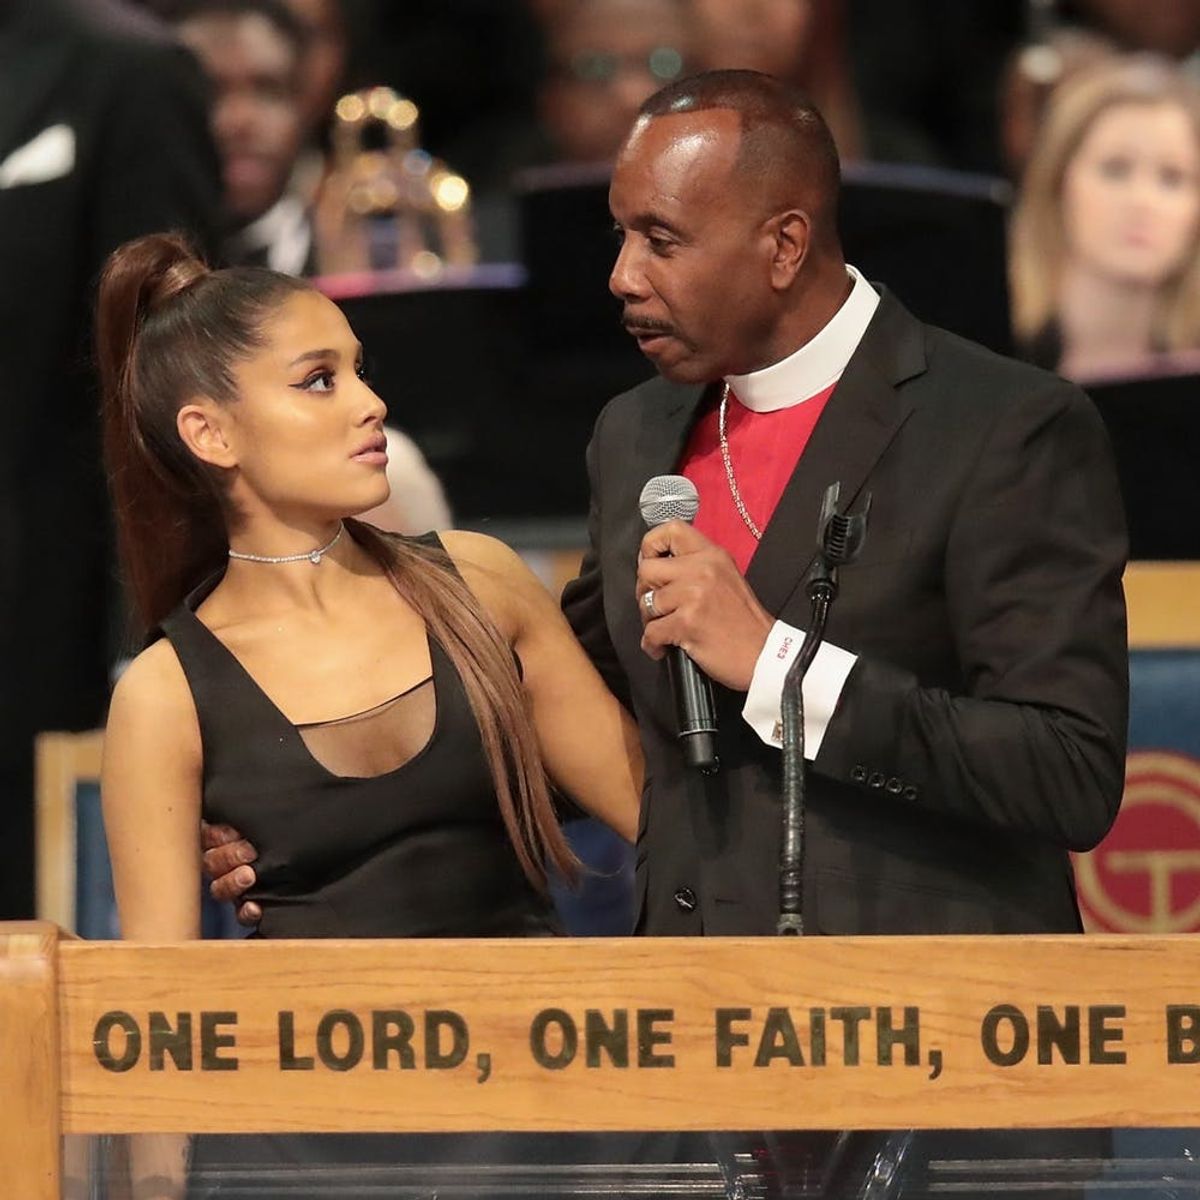 Bishop at Aretha Franklin’s Funeral Apologizes for Being ‘Too Friendly’ With Ariana Grande